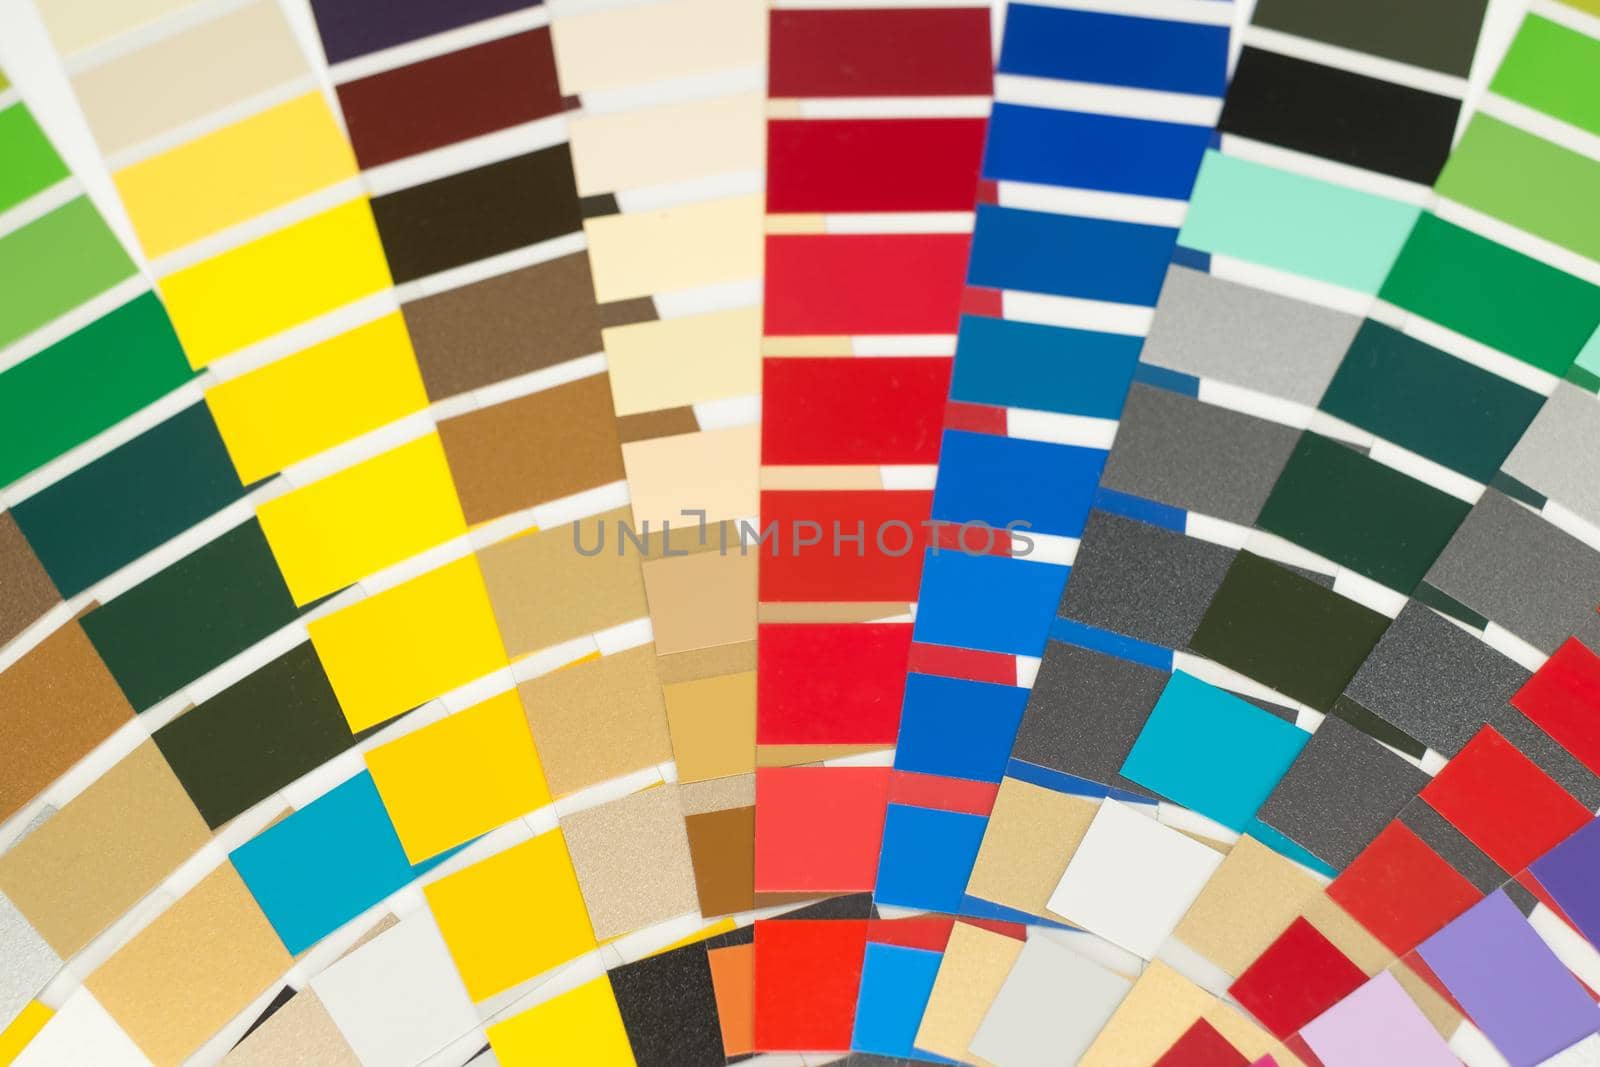 sample colors catalogue, top view by Roberto